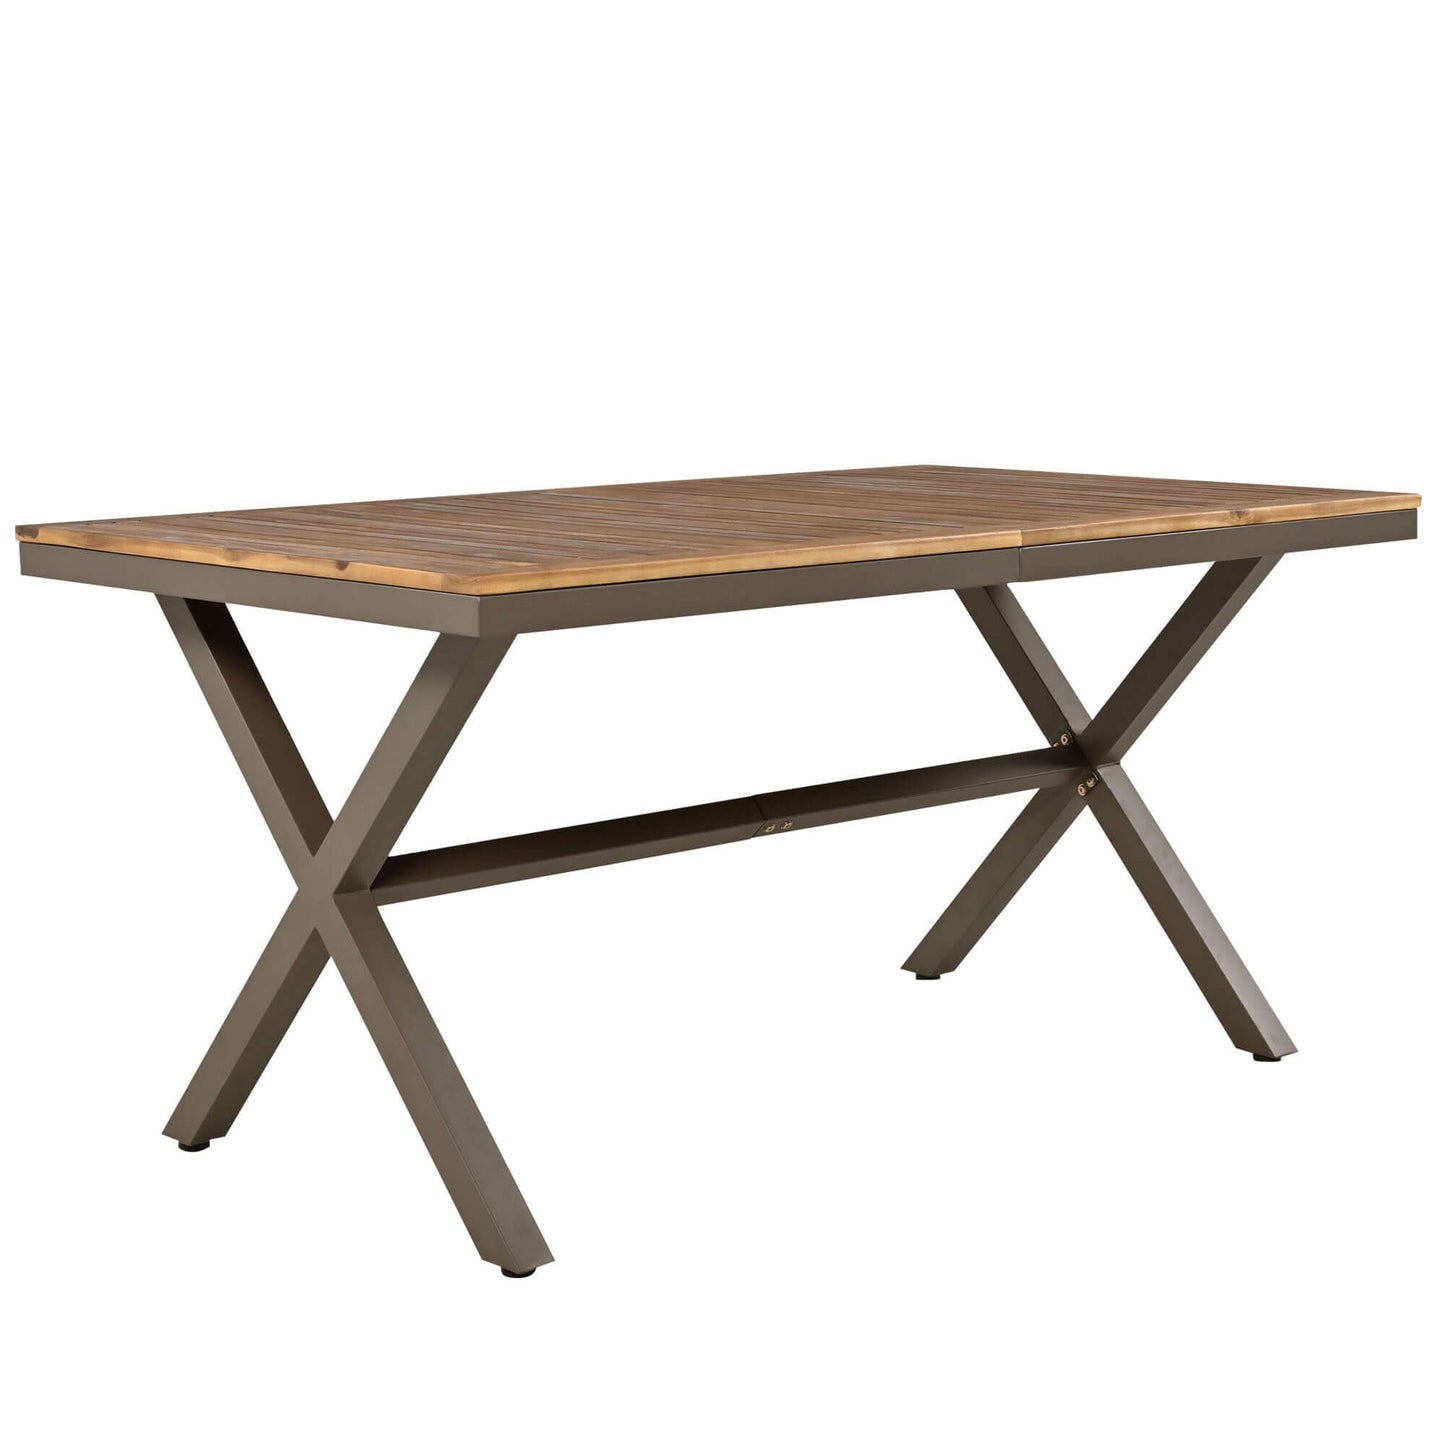 Acacia wood tabletop dining table with metal frame for outdoor patio furniture set